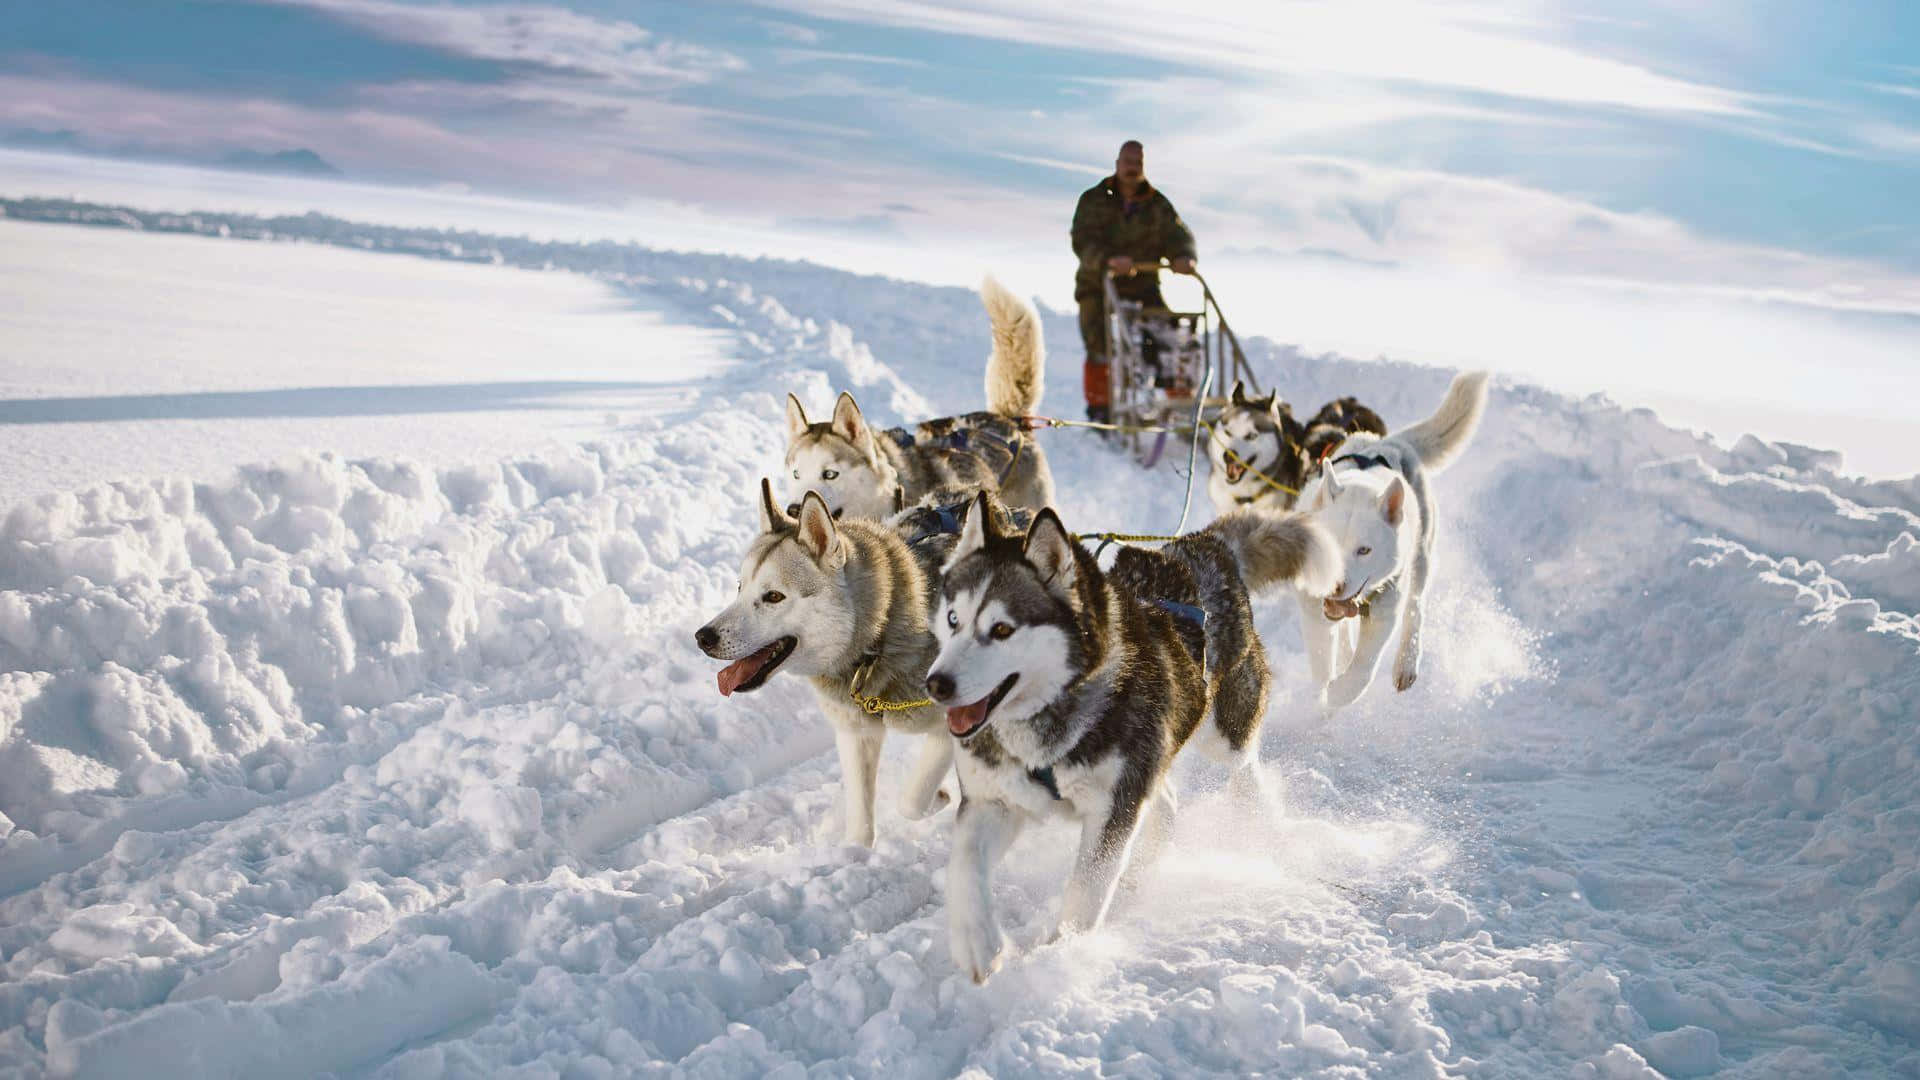 Sled Dogs Powering Through The Snow Wallpaper